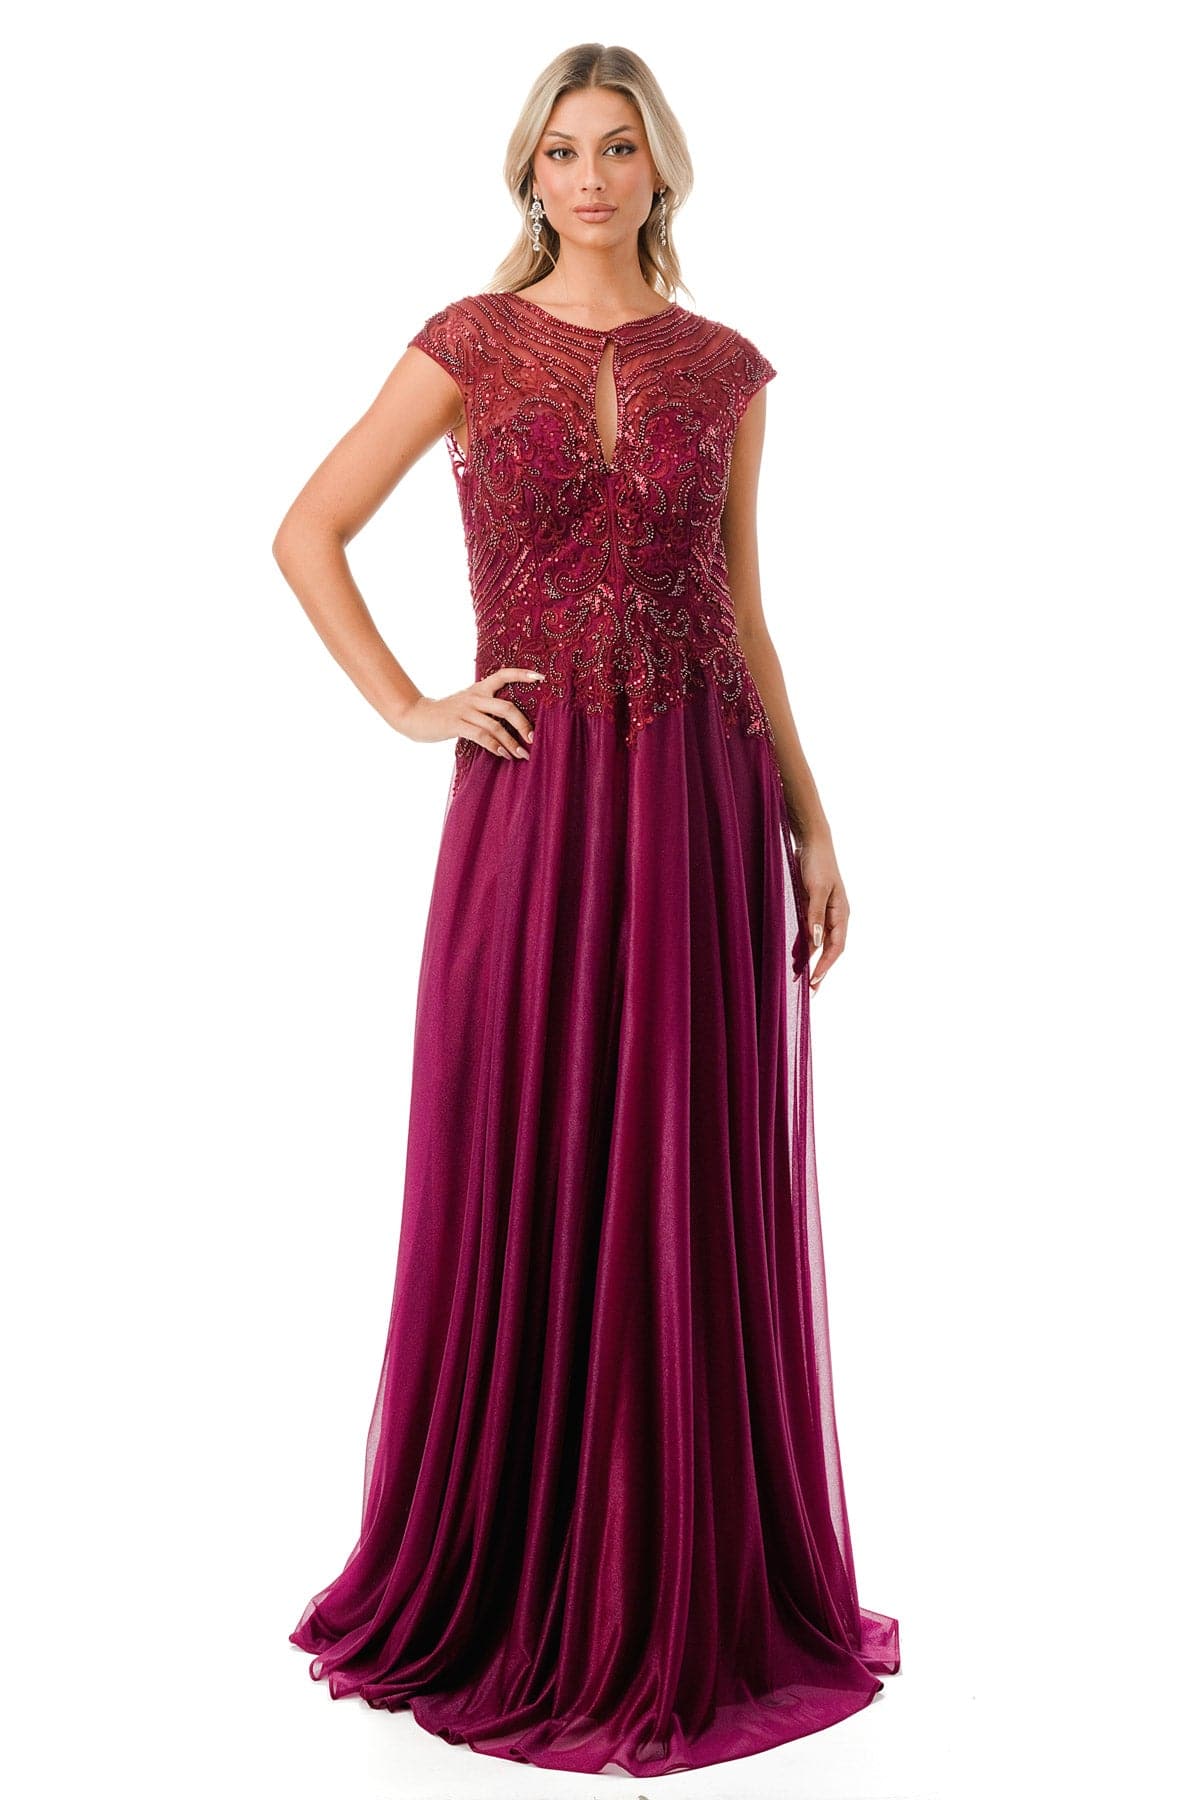 Aspeed M2736Y High Collar Lace Embroidered Chiffon Dress - NORMA REED